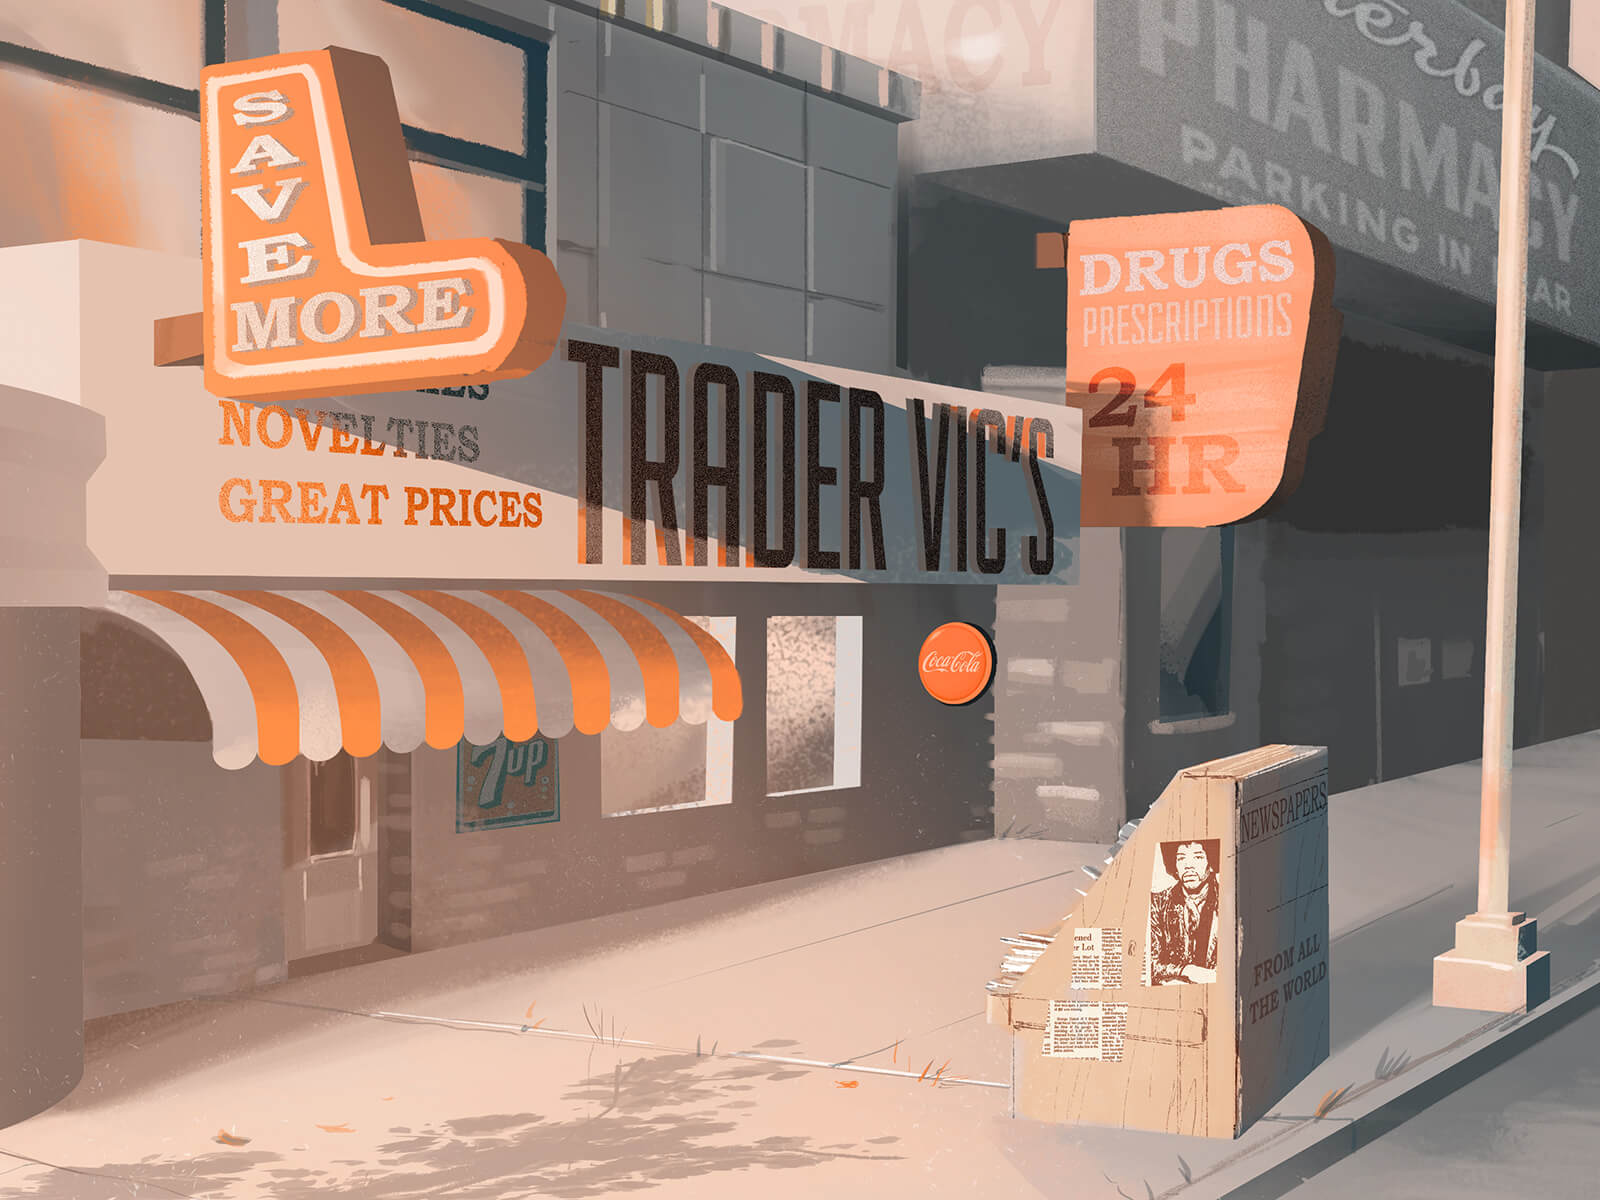 digital painting of a store called trader vic's, rendered in shades of orange and grey